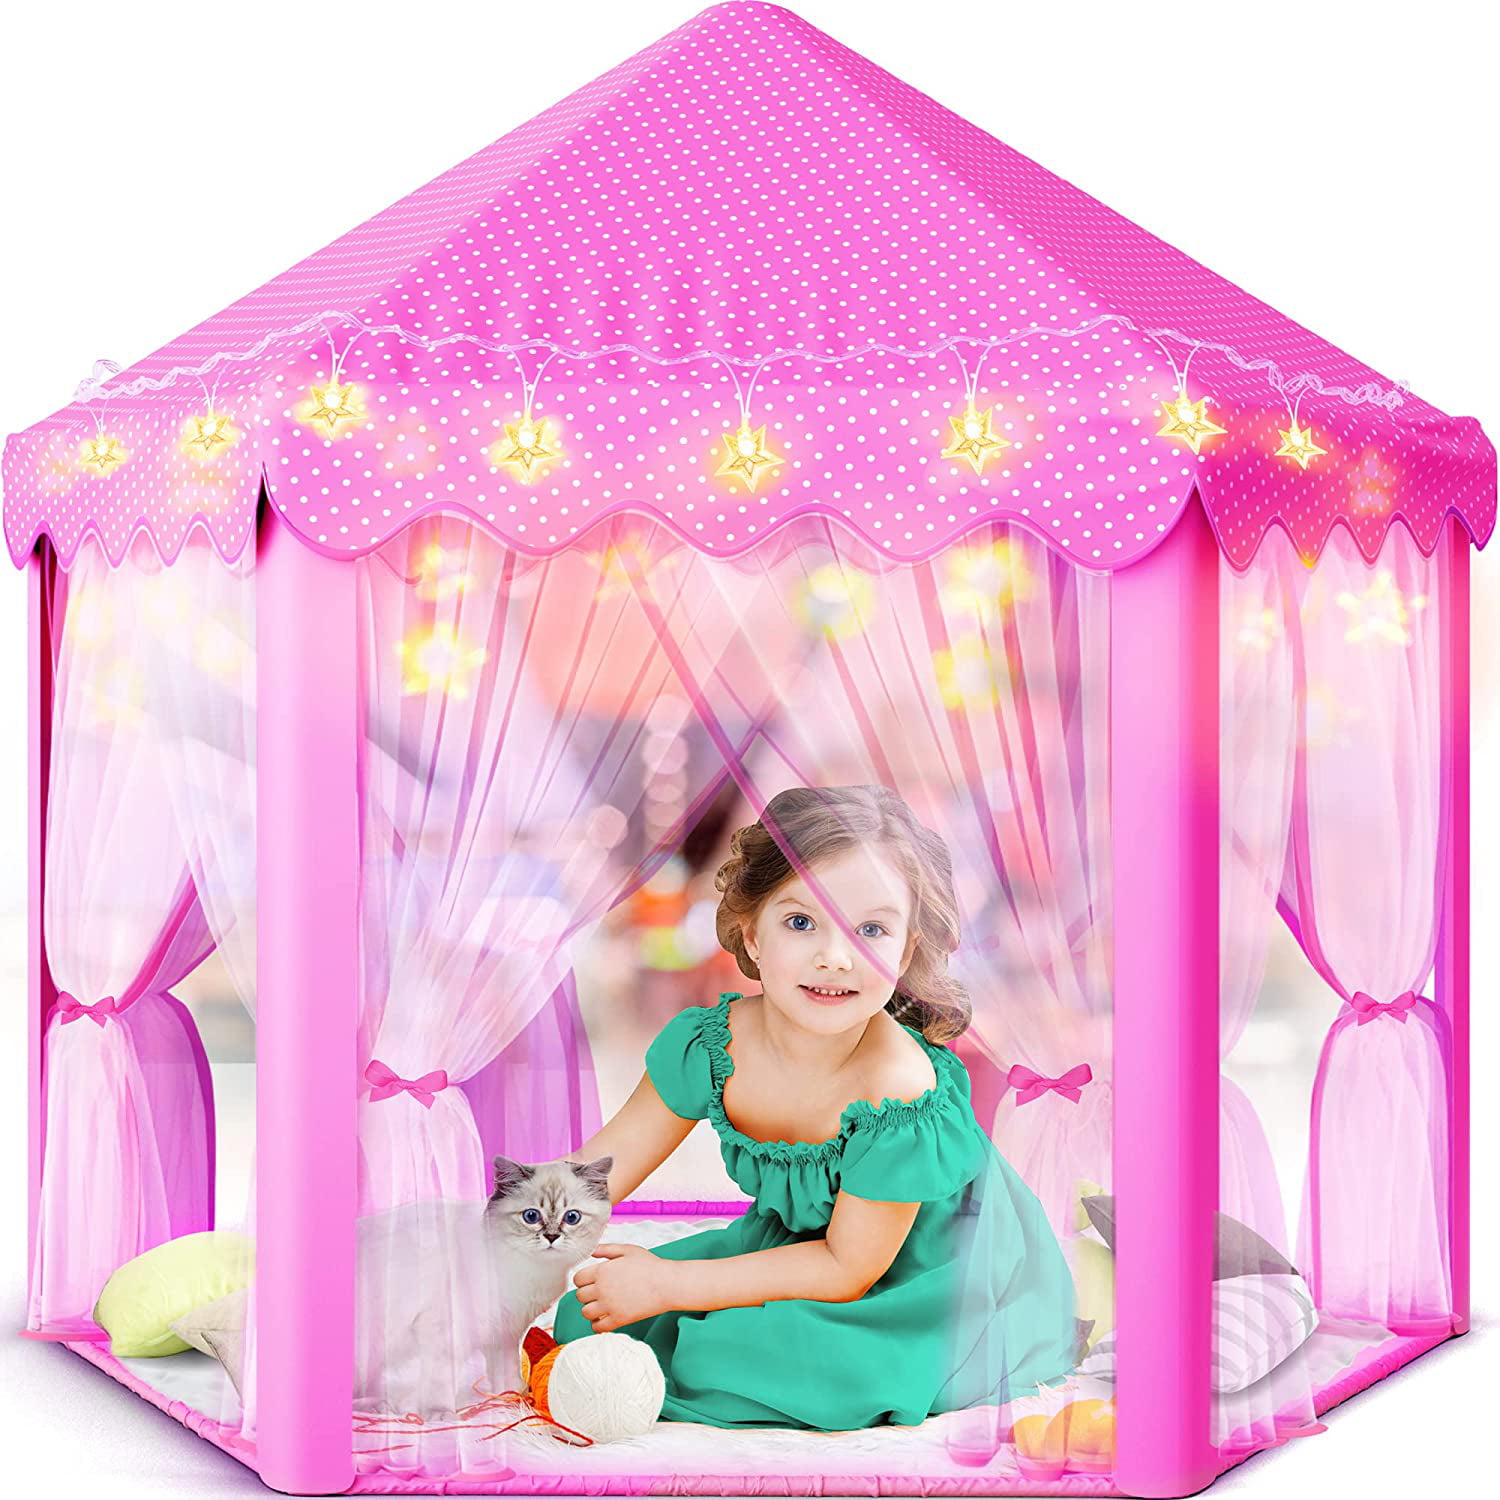 Deluxe Luxury Pink Princess Style Kids Play Tent w Sheer Curtains & Star Lights 